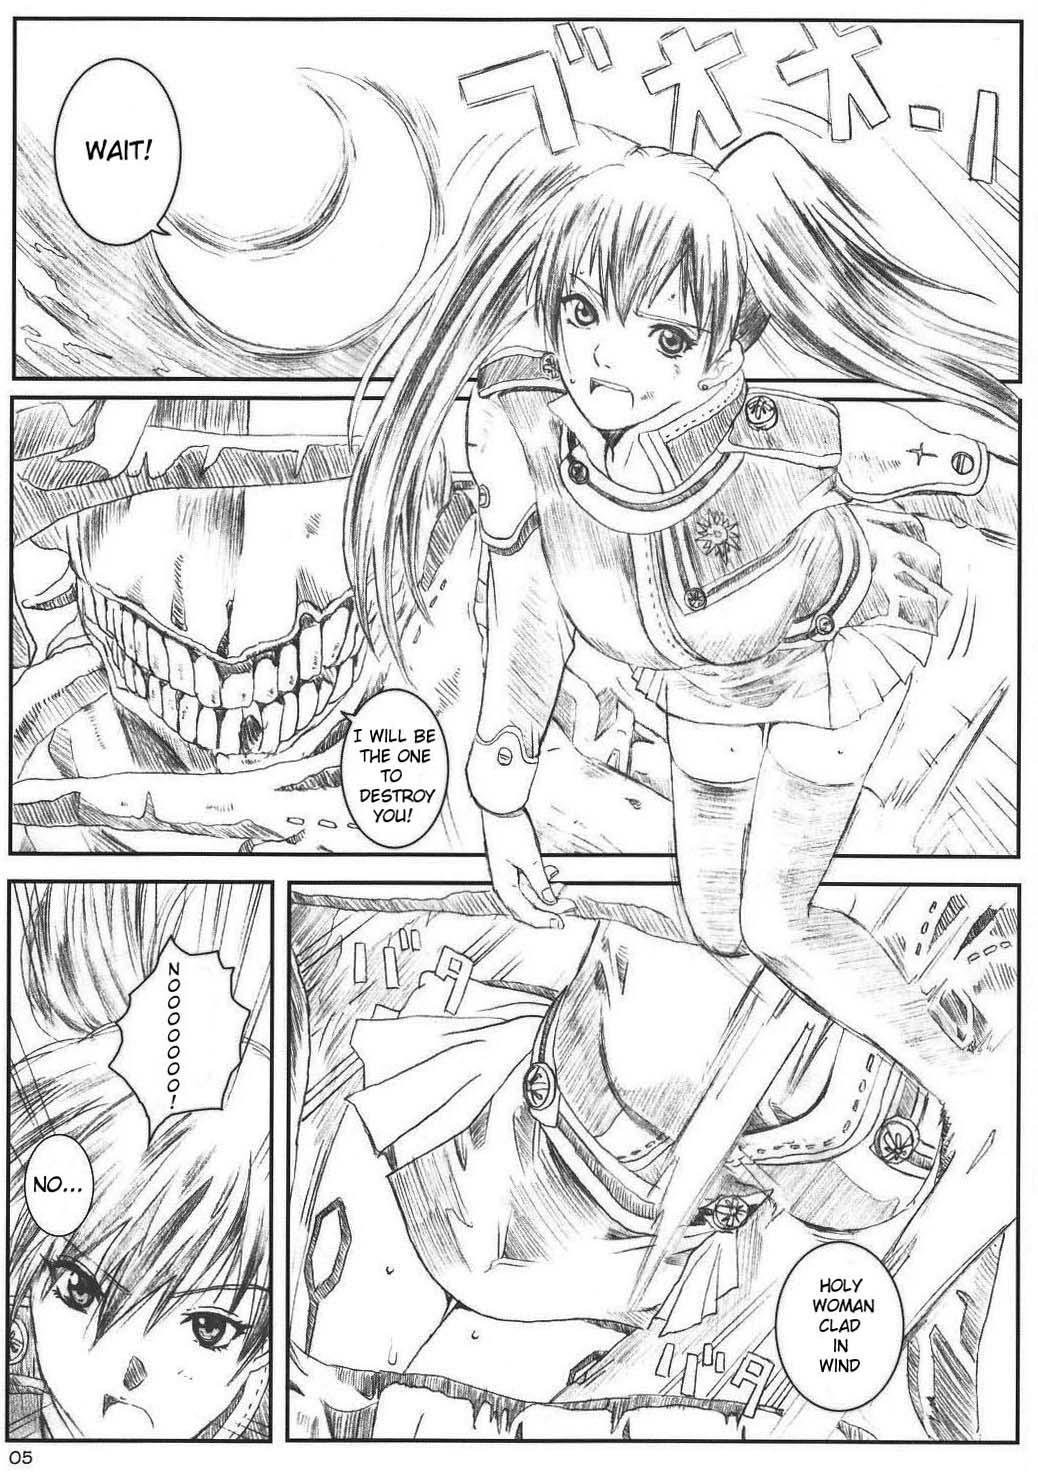 Shaking Innocence - D.gray-man Jerkoff - Page 4